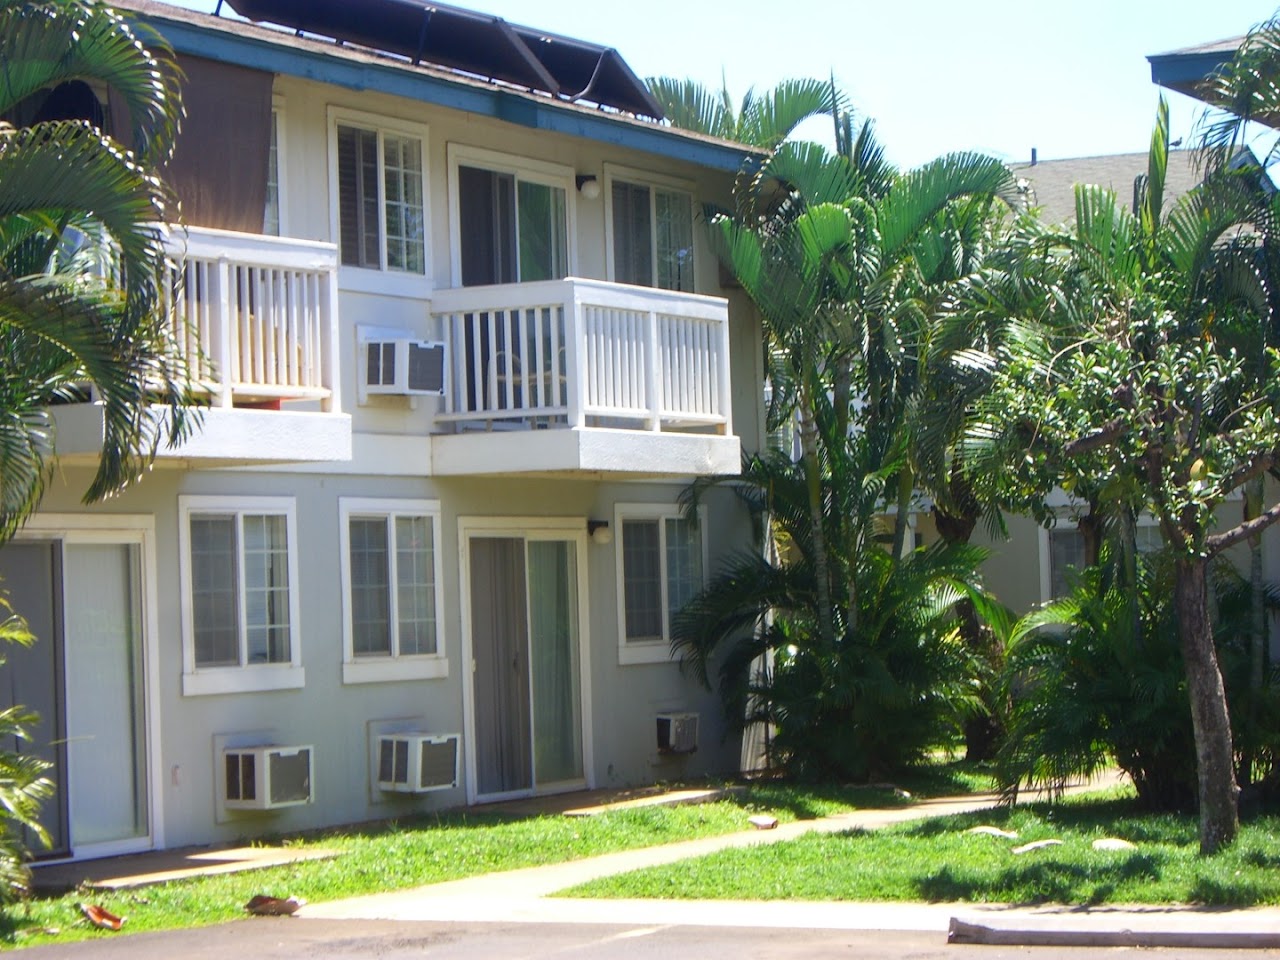 Photo of FRONT STREET APTS. Affordable housing located at 2001 KENUI PL LAHAINA, HI 96761